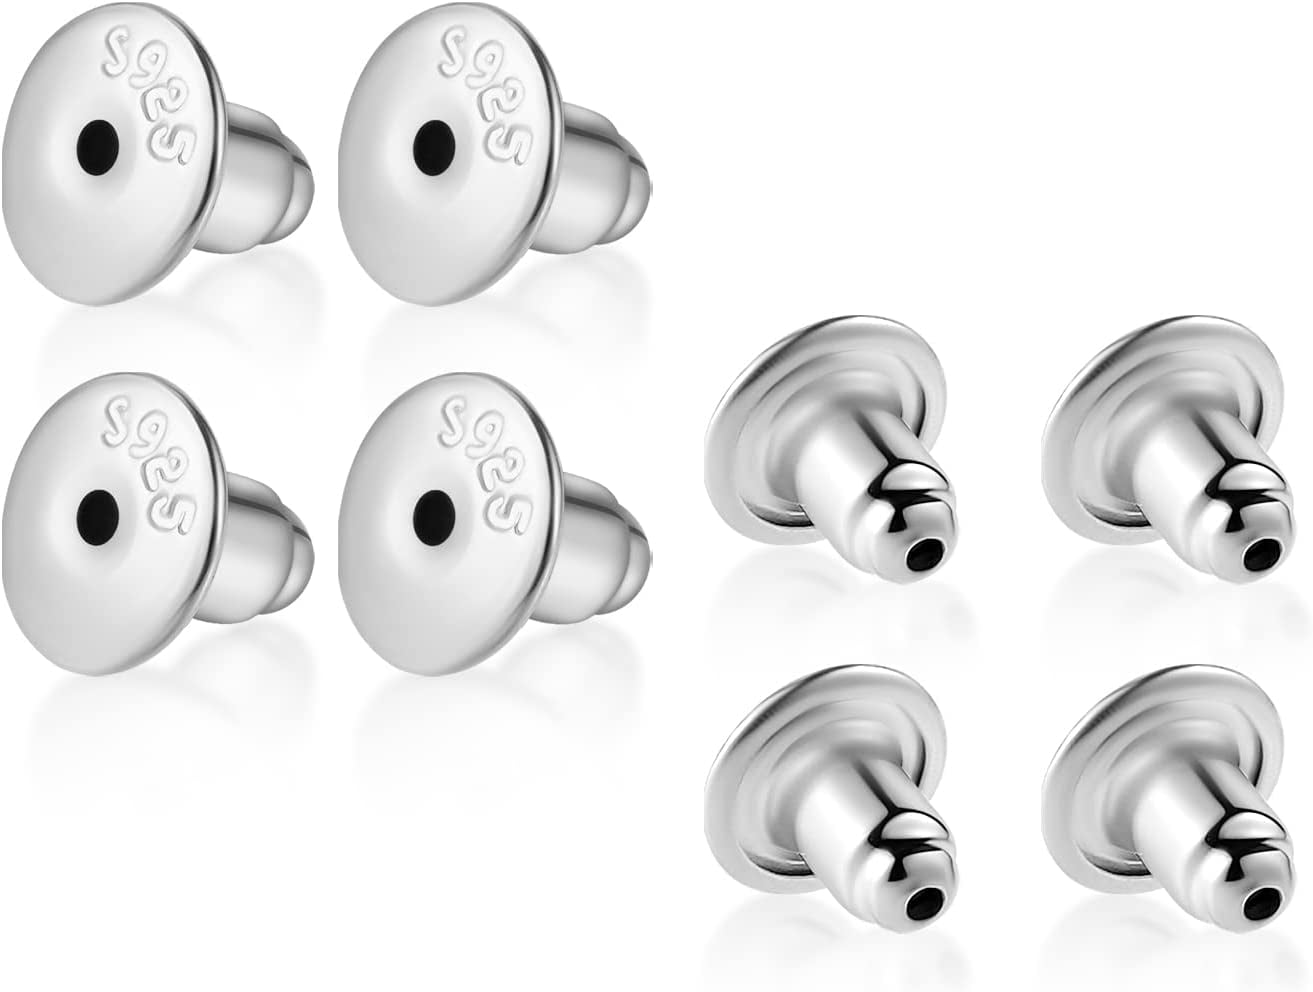 Solid .925 Sterling Silver Locking Earring Backs, Safety Secure  Hypoallergenic Silver Earring Backs for Studs